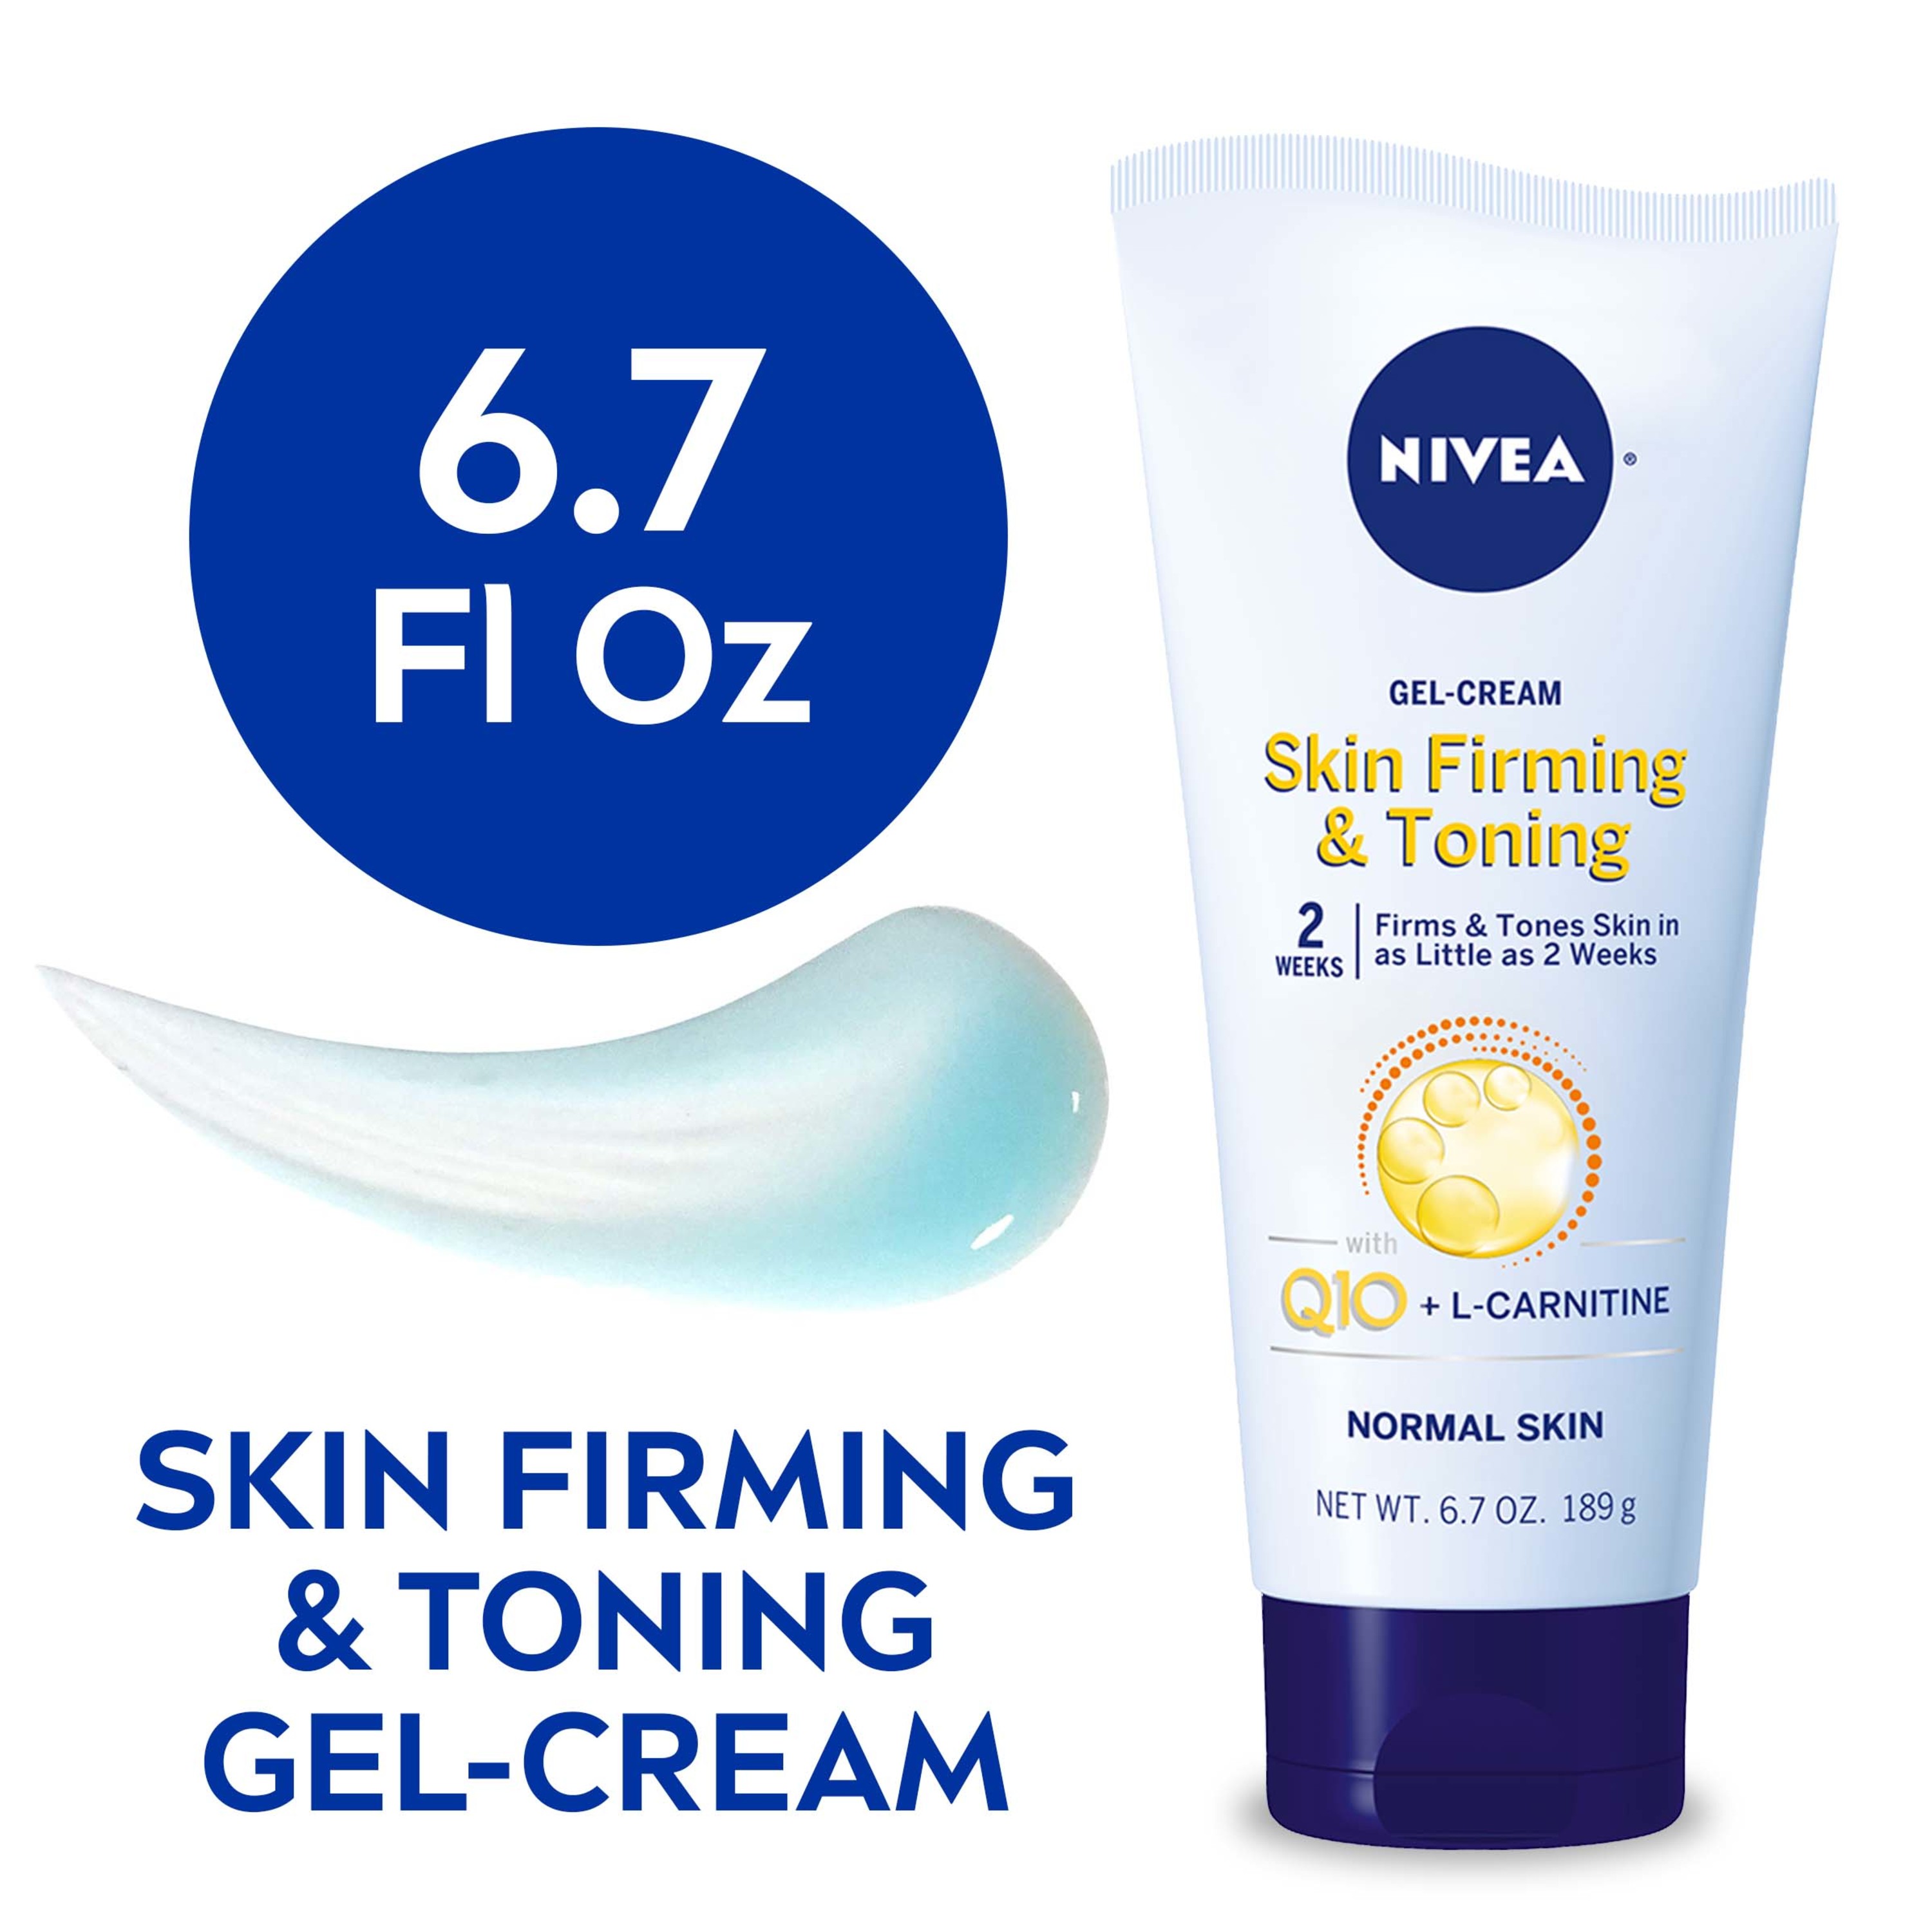 NIVEA Skin Firming and Toning Body Gel-Cream with Q10, 6.7 Oz Tube - image 1 of 12